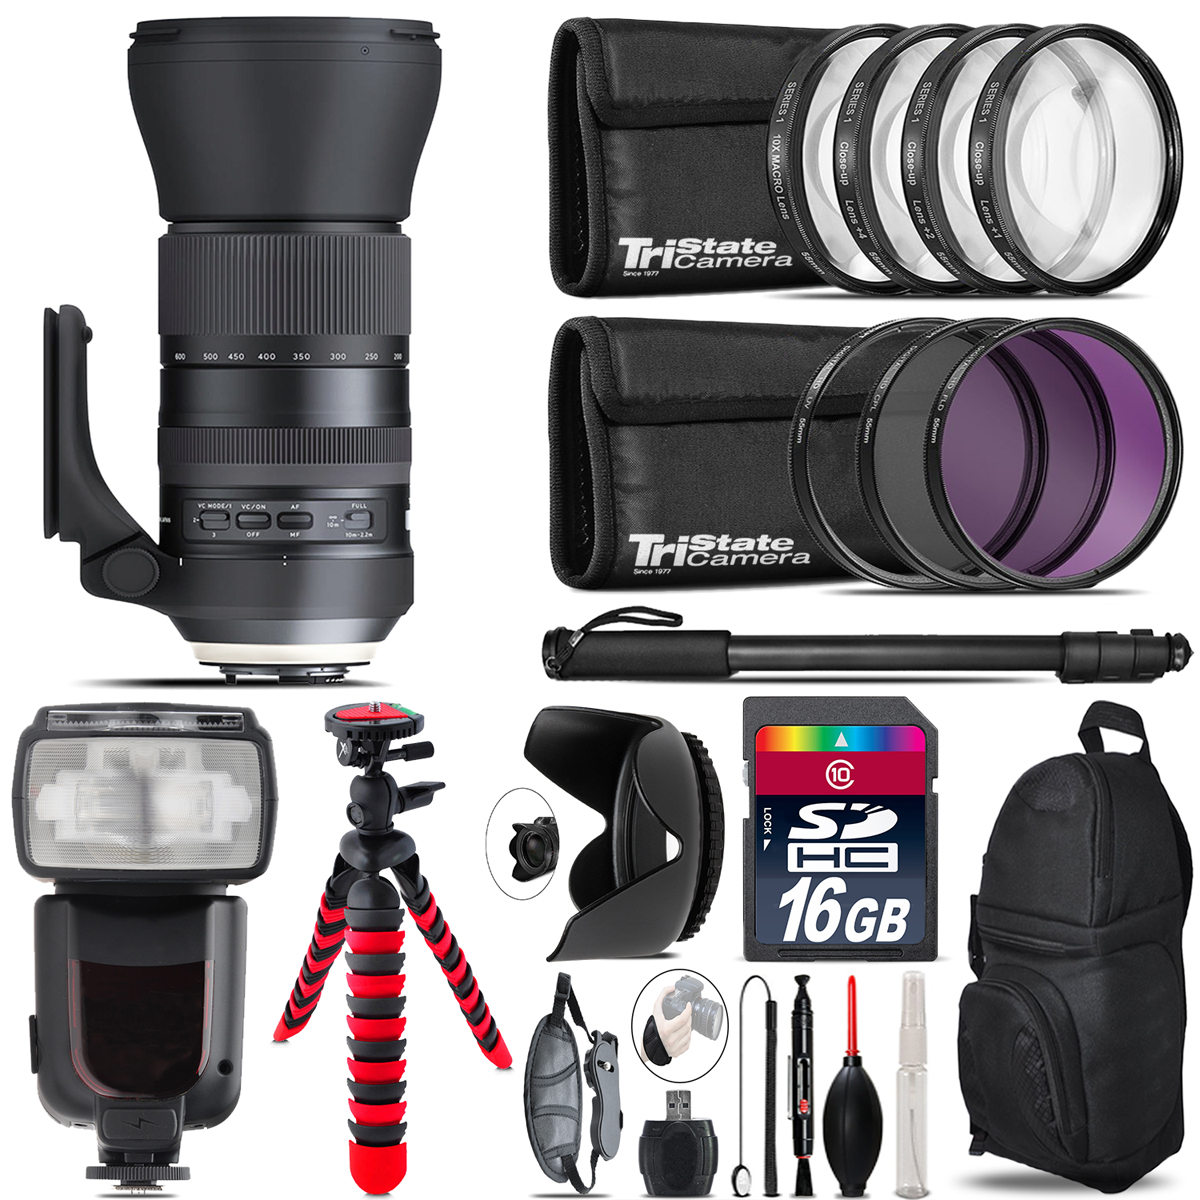 Tamron 150-600mm G2 for Canon + Professional Flash & More - 16GB Accessory Kit *FREE SHIPPING*